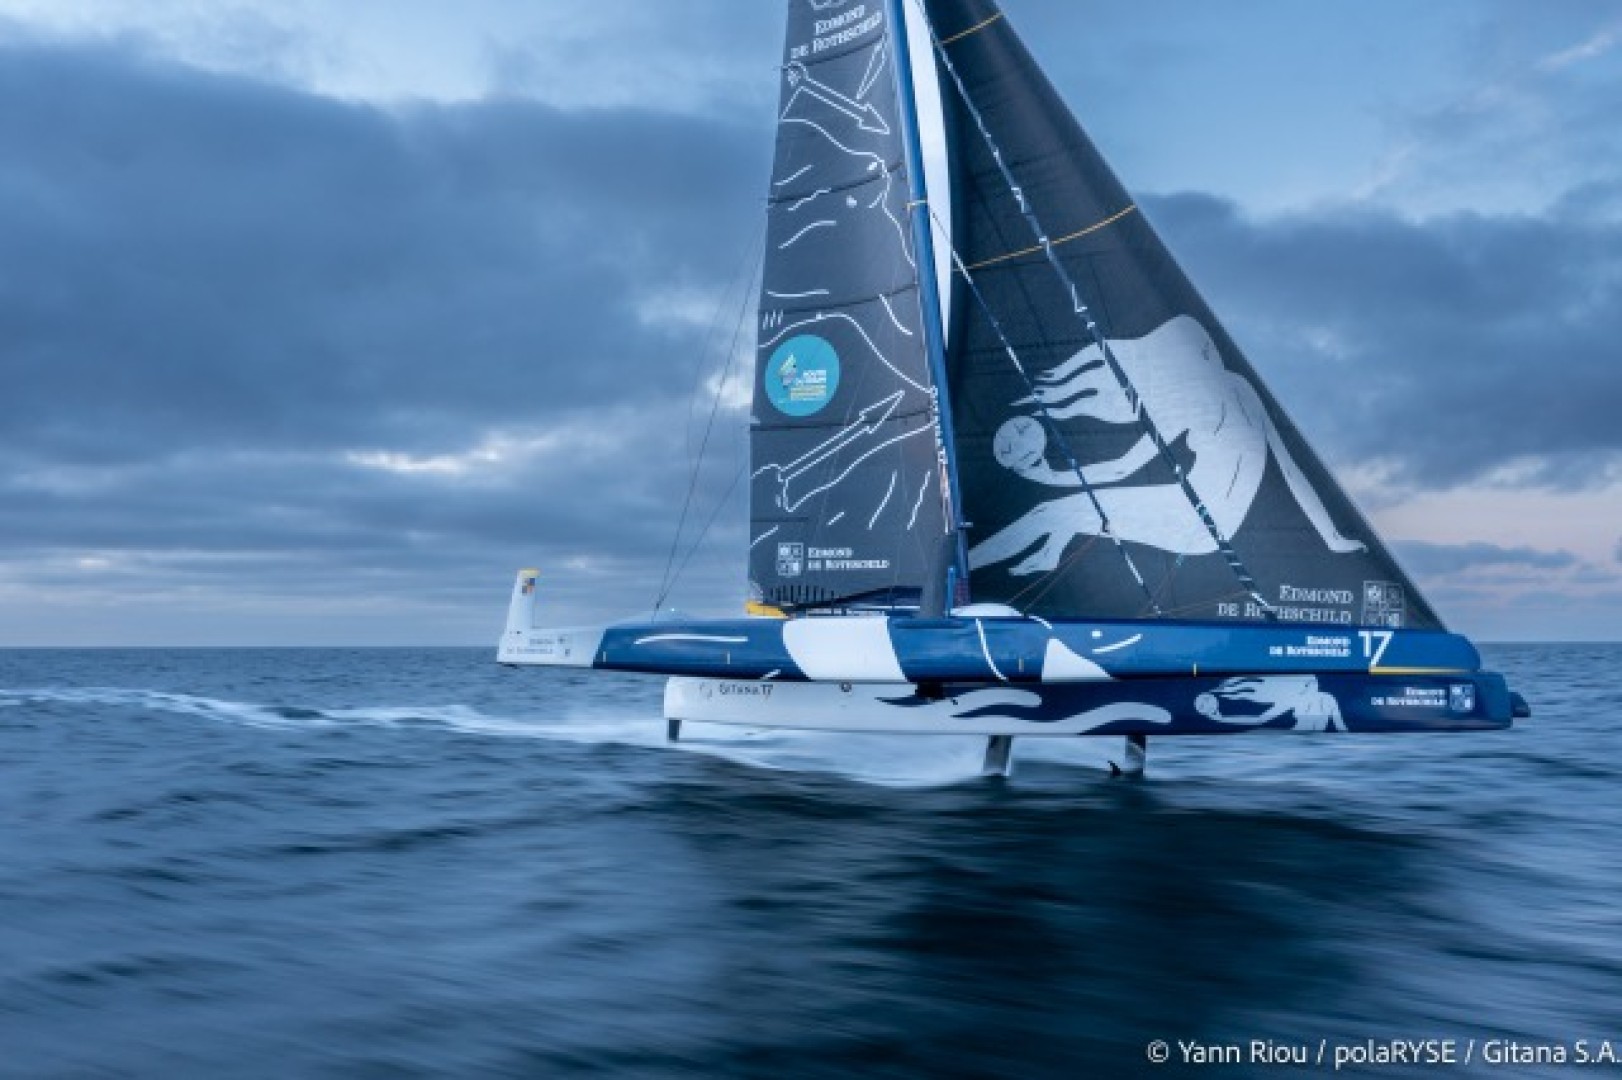 Route du Rhum Destination Guadeloupe: a sprint finish after all